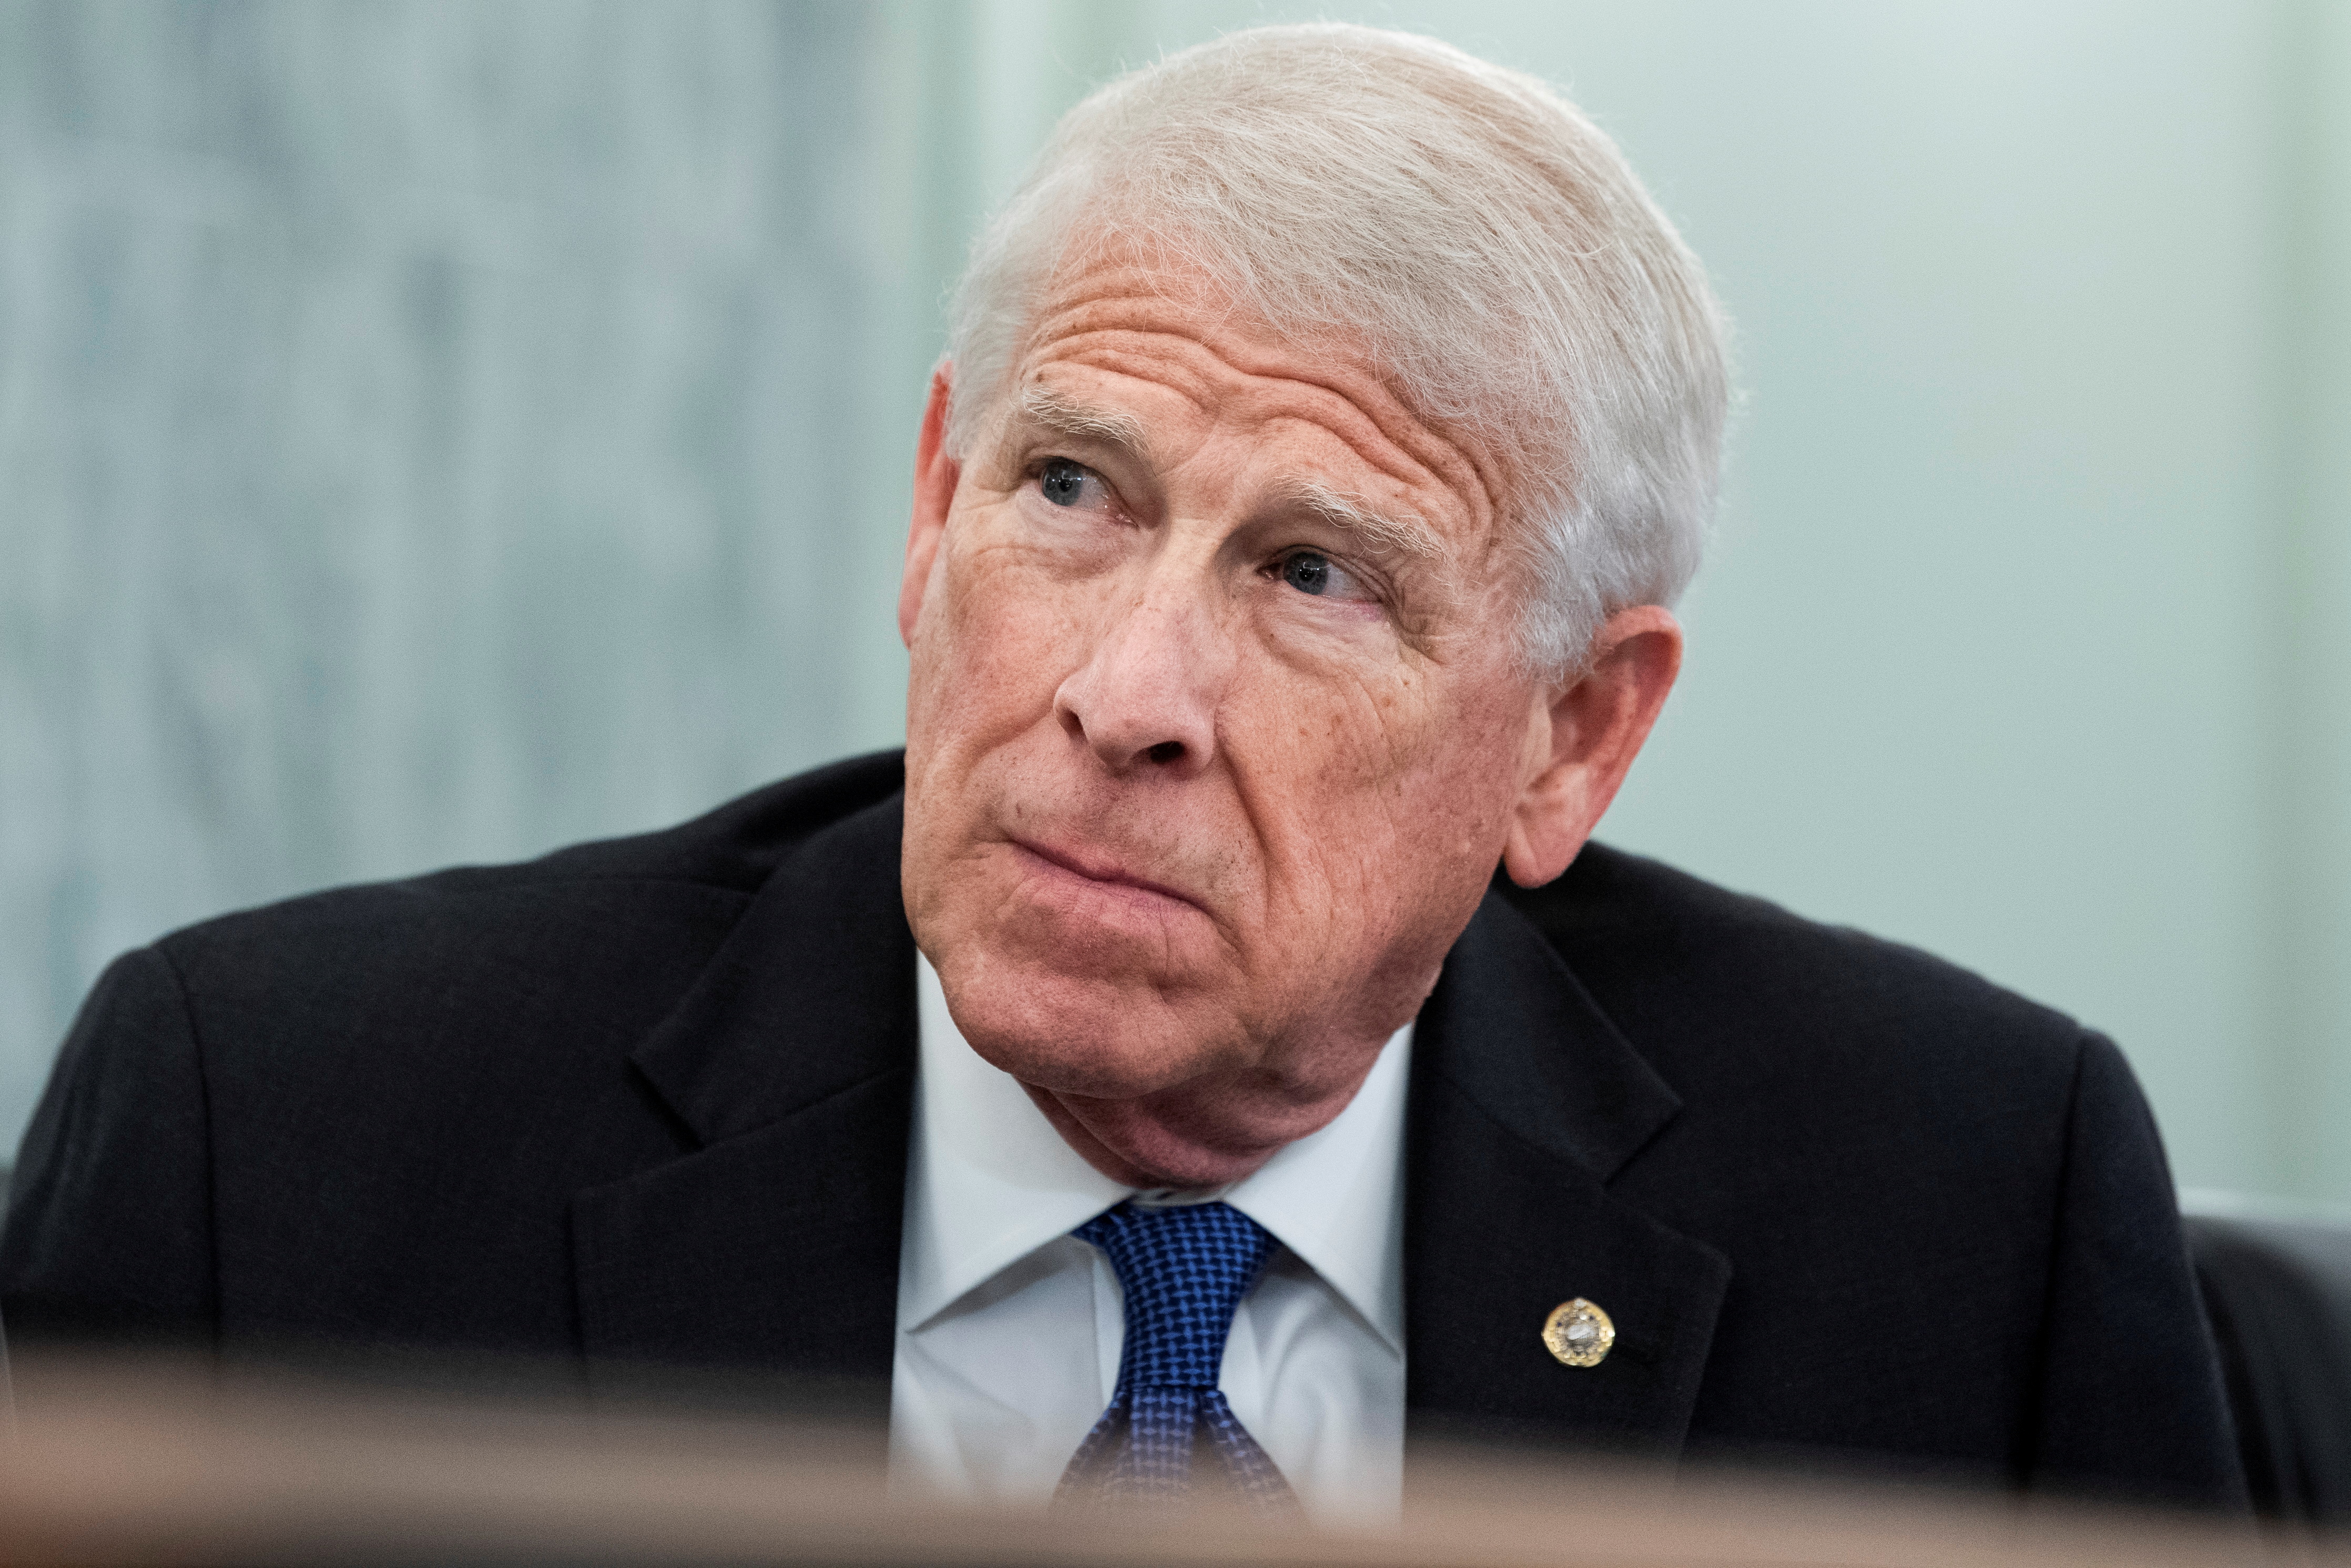 U.S. Senate Commerce, Science and Transportation Committee Chairman Roger Wicker (R-MS) on Capitol Hill in Washington January 26, 2021. Tom Williams/Pool via REUTERS/File Photo